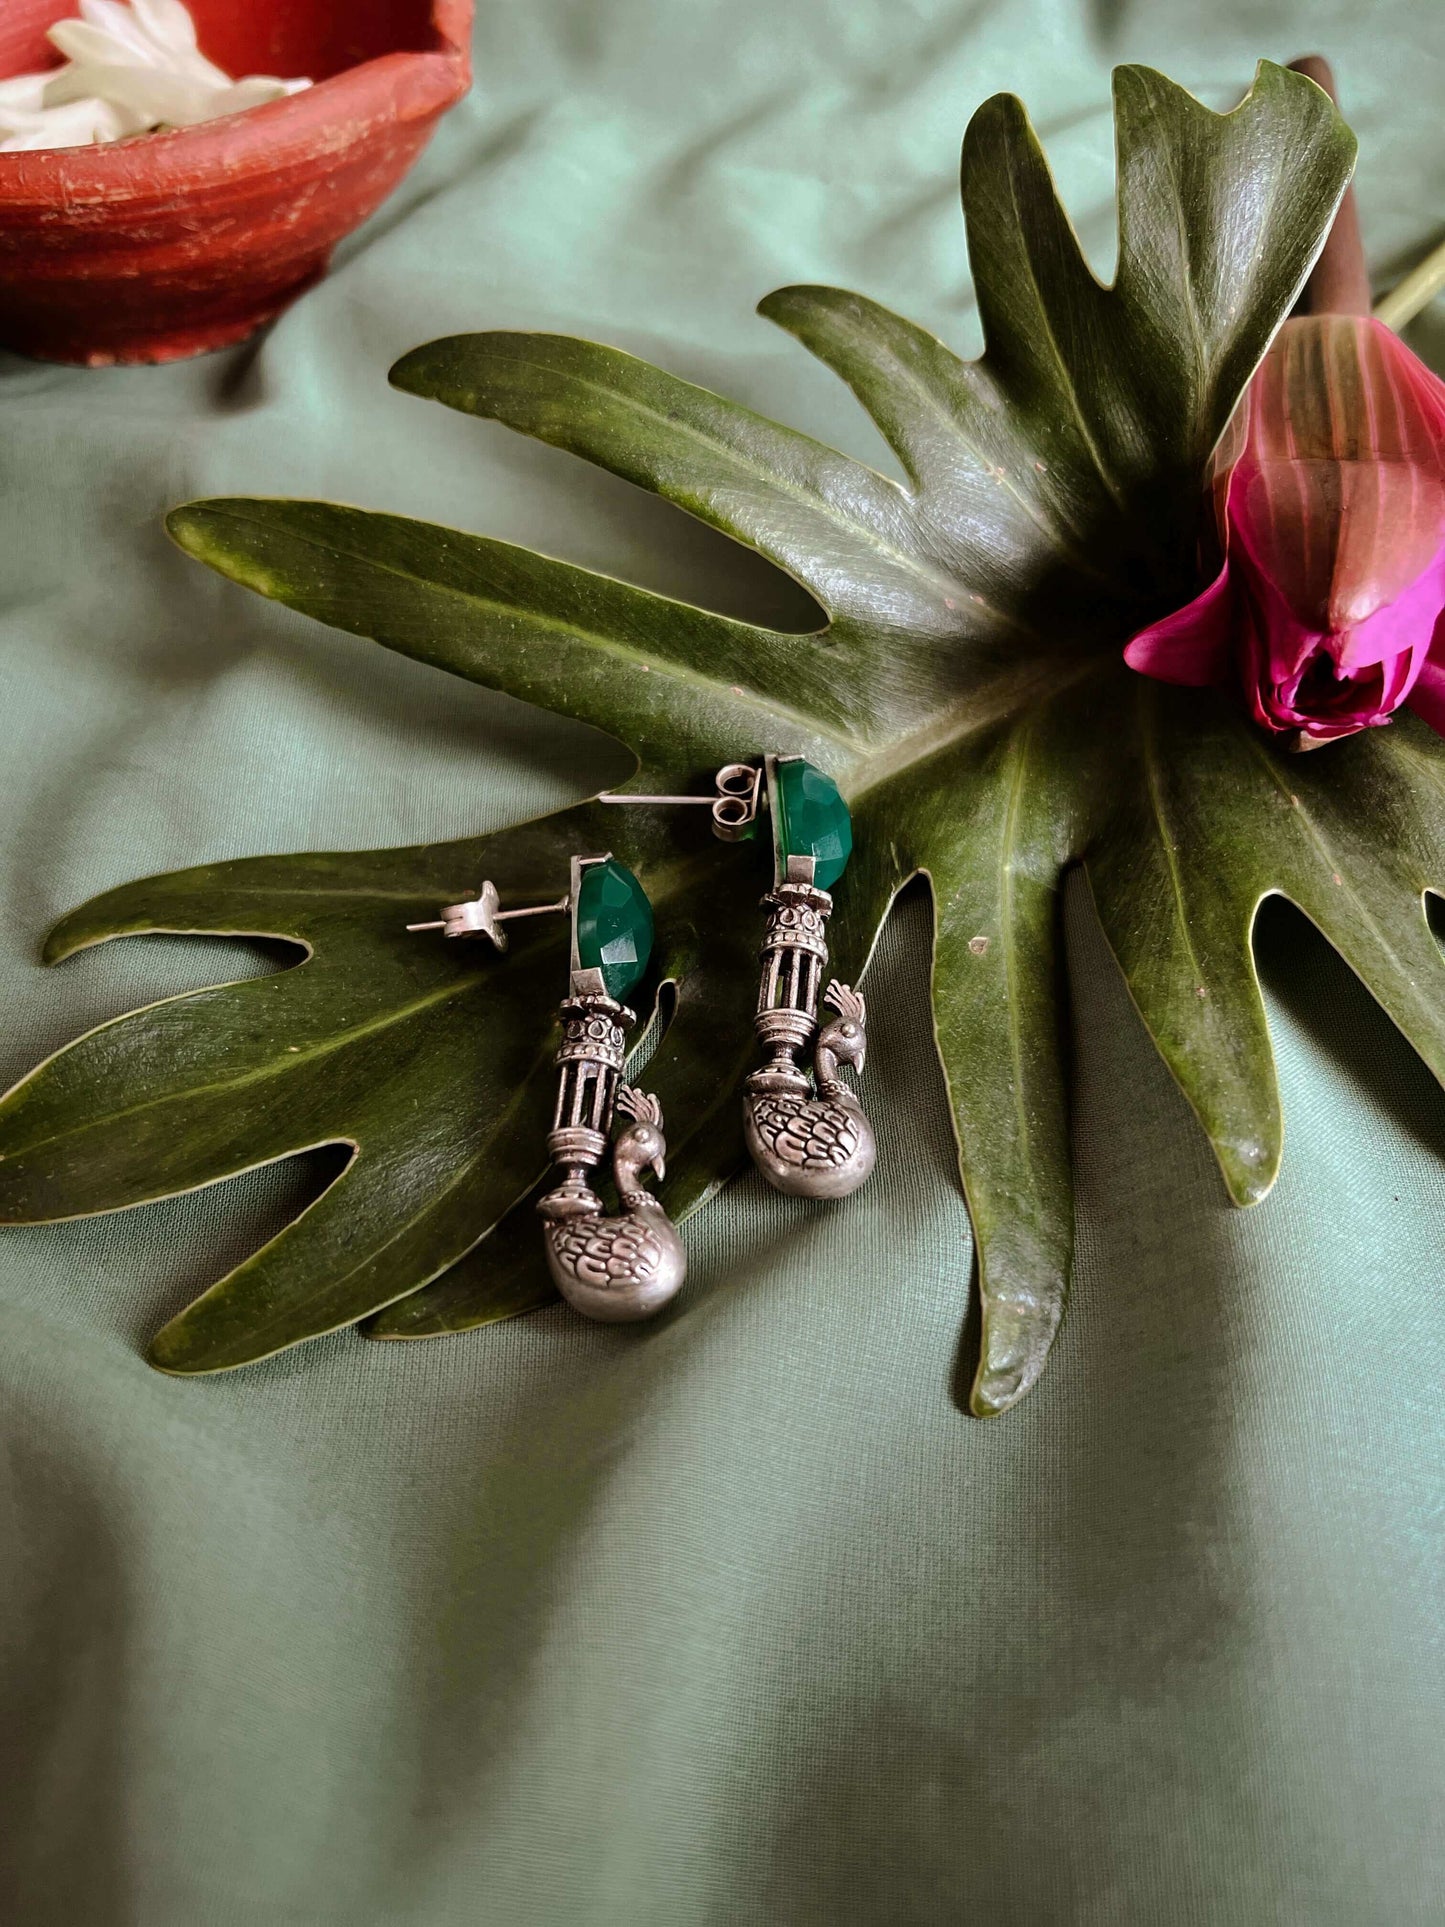 Hansika silver earring with emerald glass stone